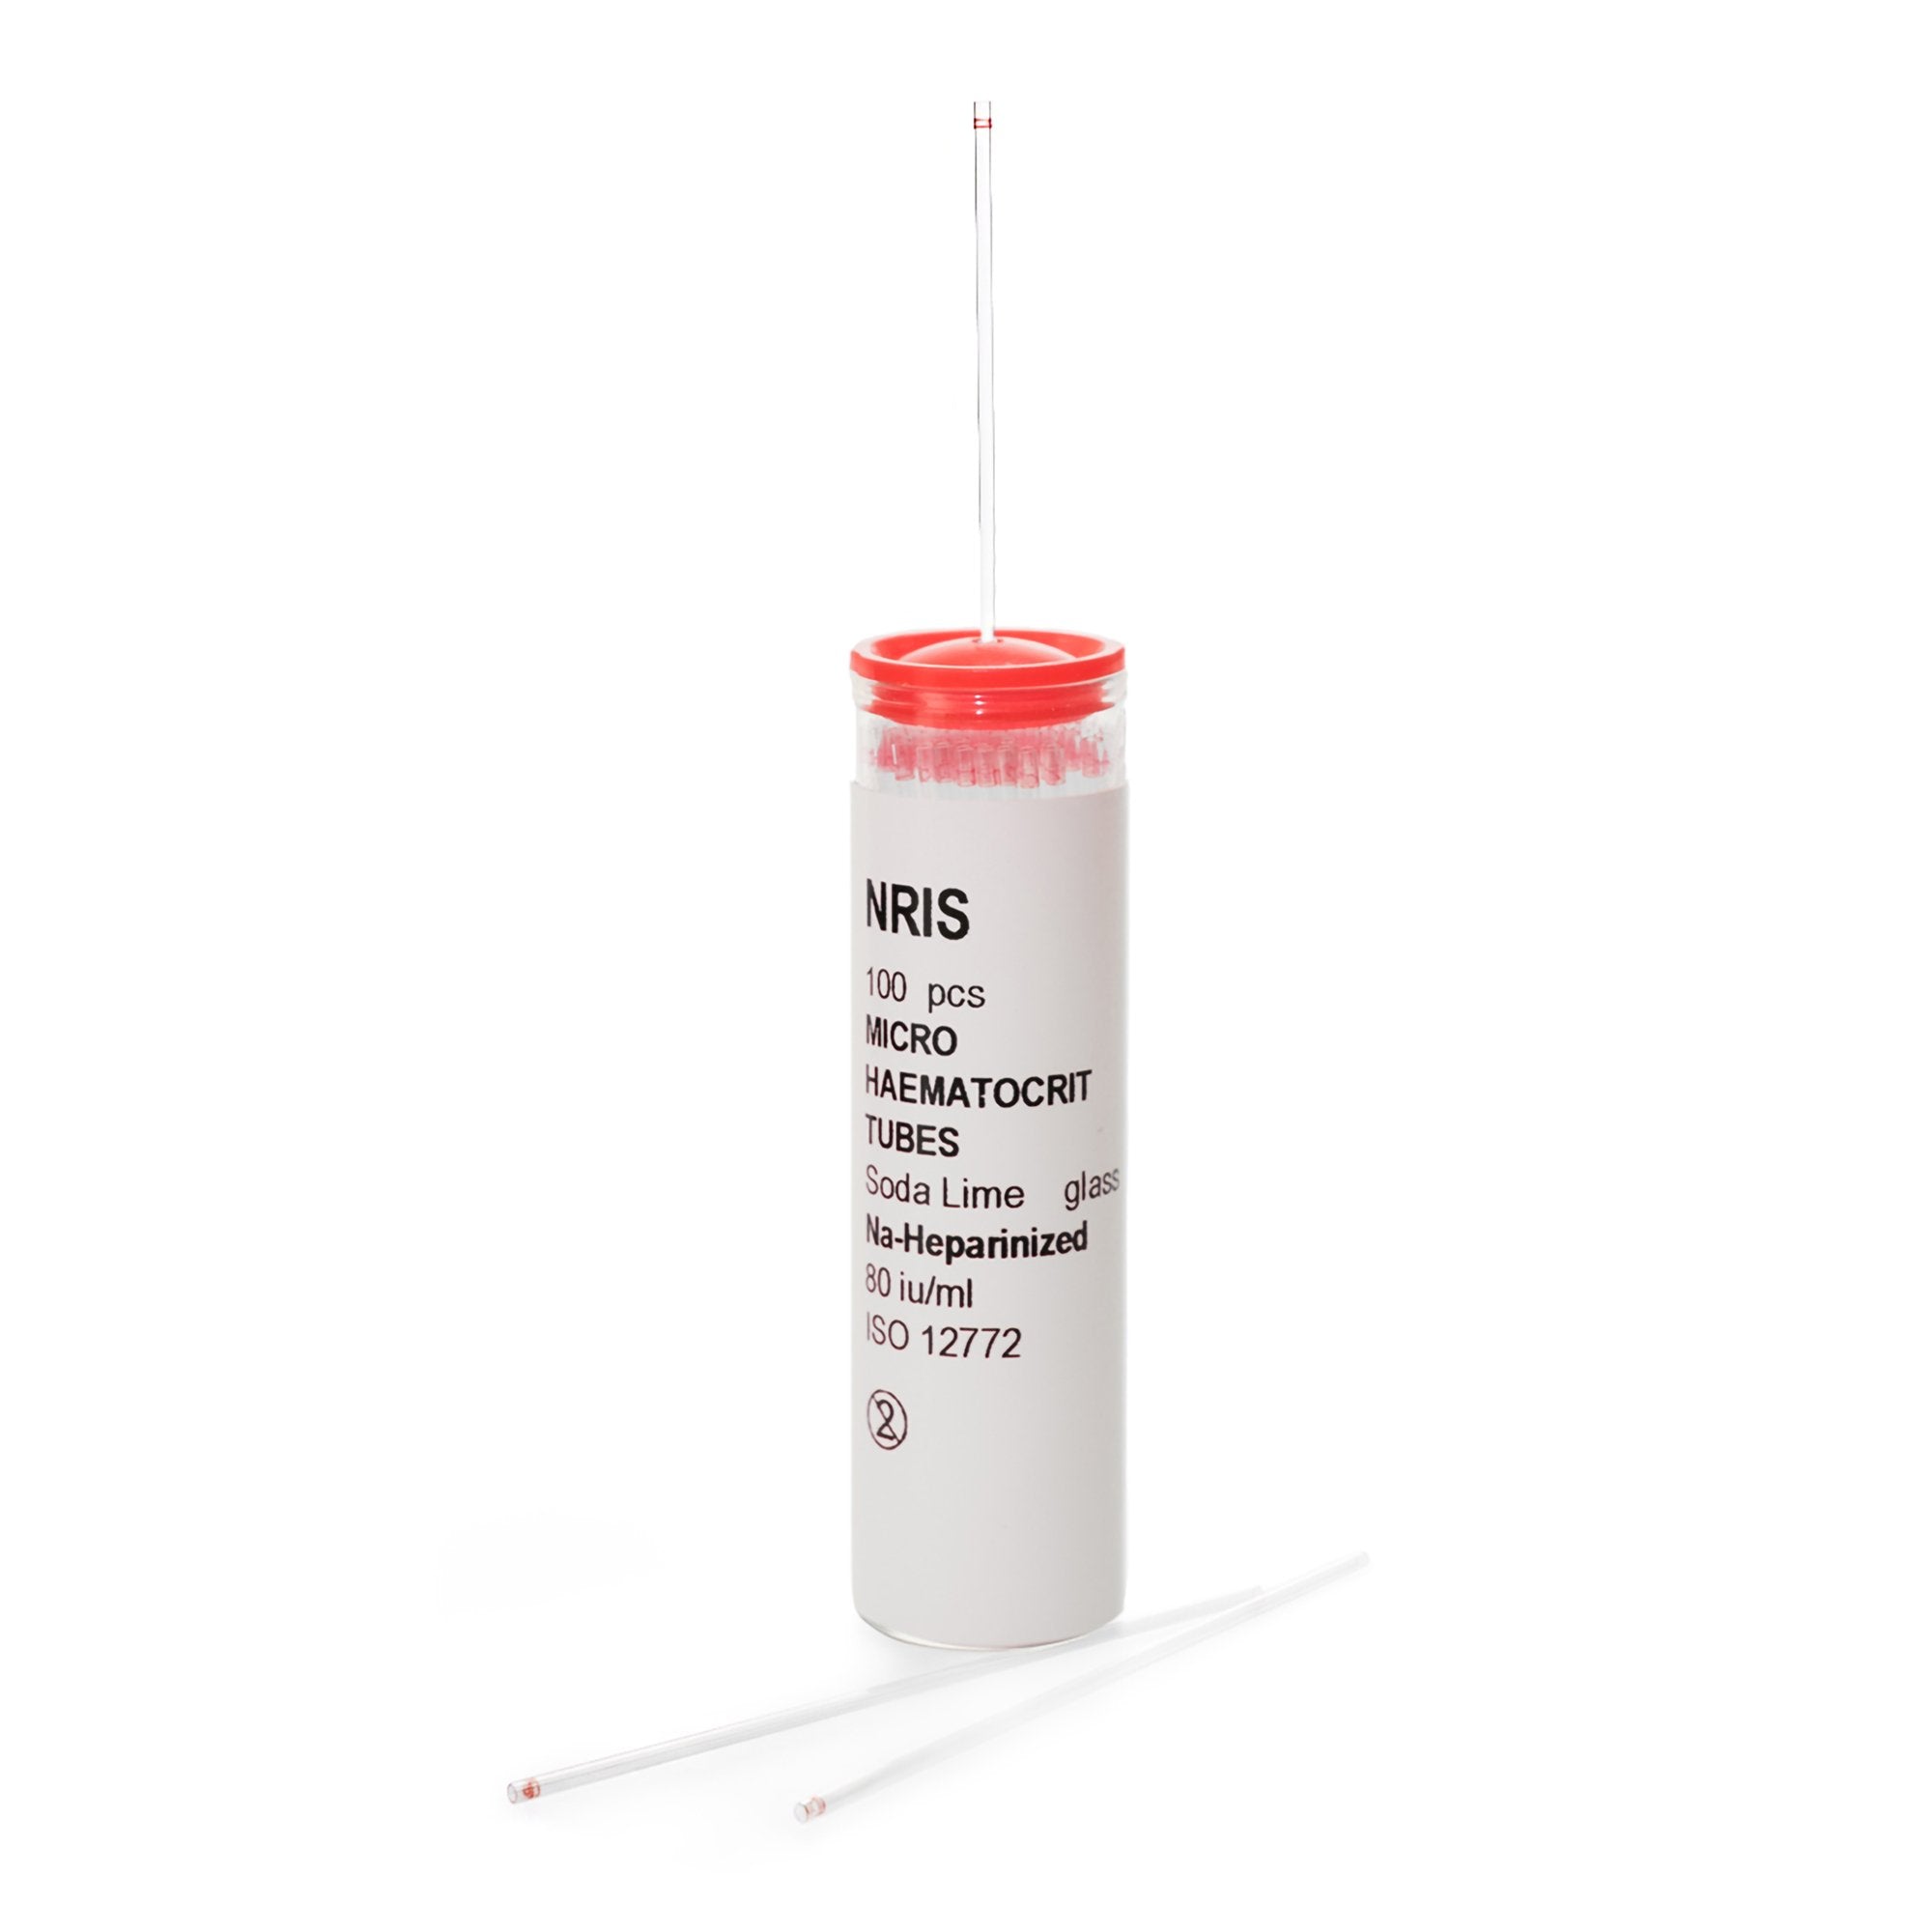 McKesson Capillary Blood Collection Tube Micro-hematocrit Sodium Heparin Additive 1.1 X 75 mm 75 L Red Stripe Without Closure Glass Tube